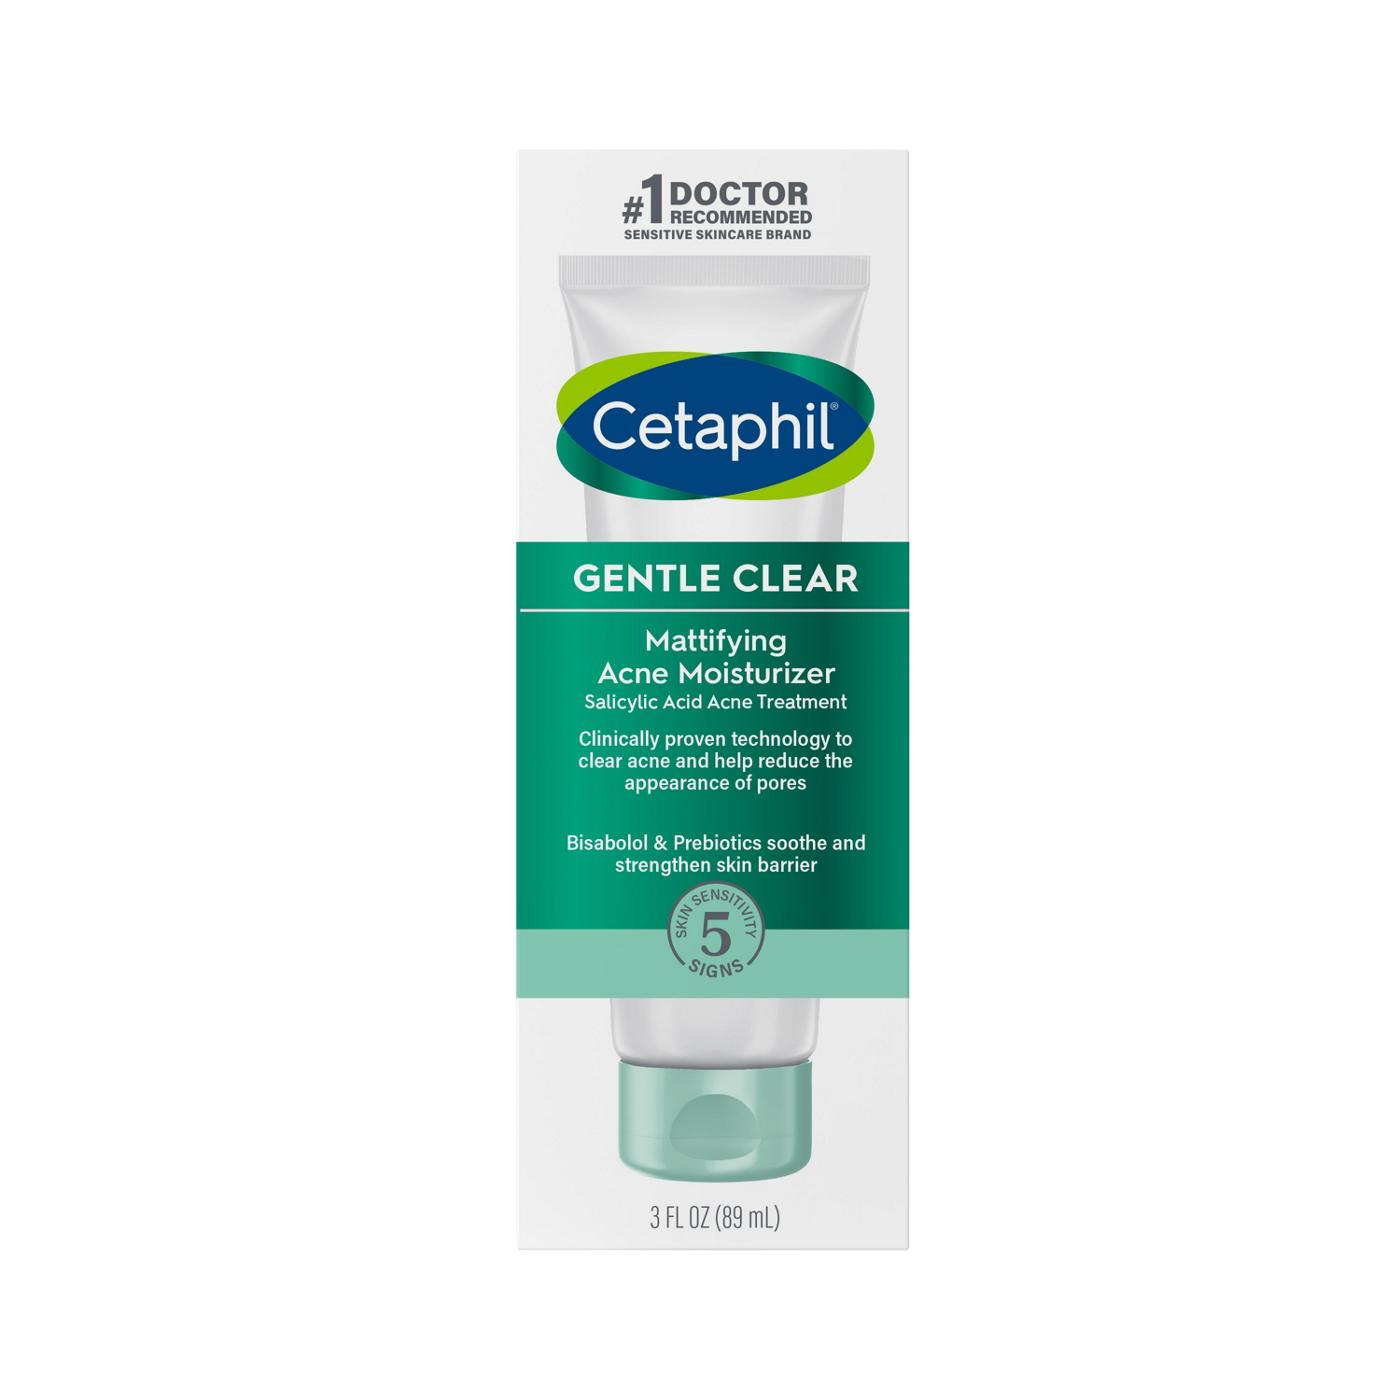 Cetaphil Gentle Clear Mattifying Acne Moisturizer; image 1 of 11